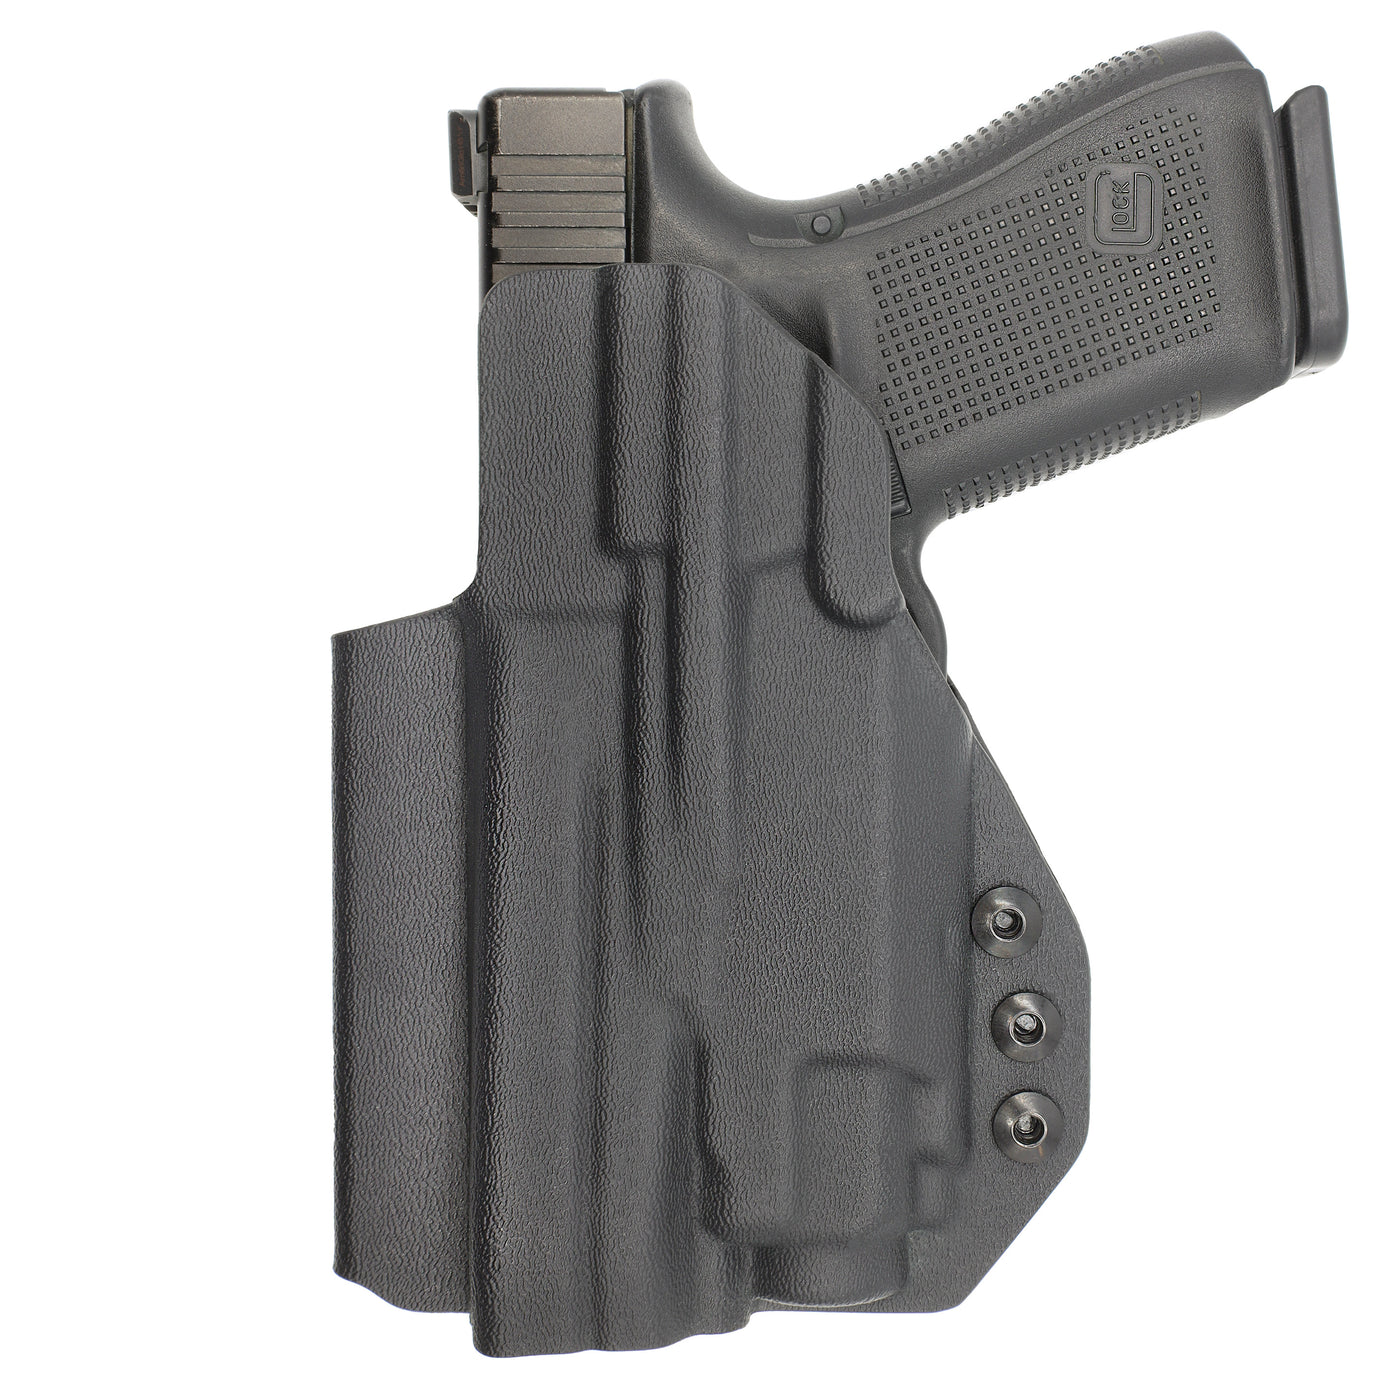 C&G Holsters custom IWB Tactical Glock 20/21 streamlight TLR8 holstered back view